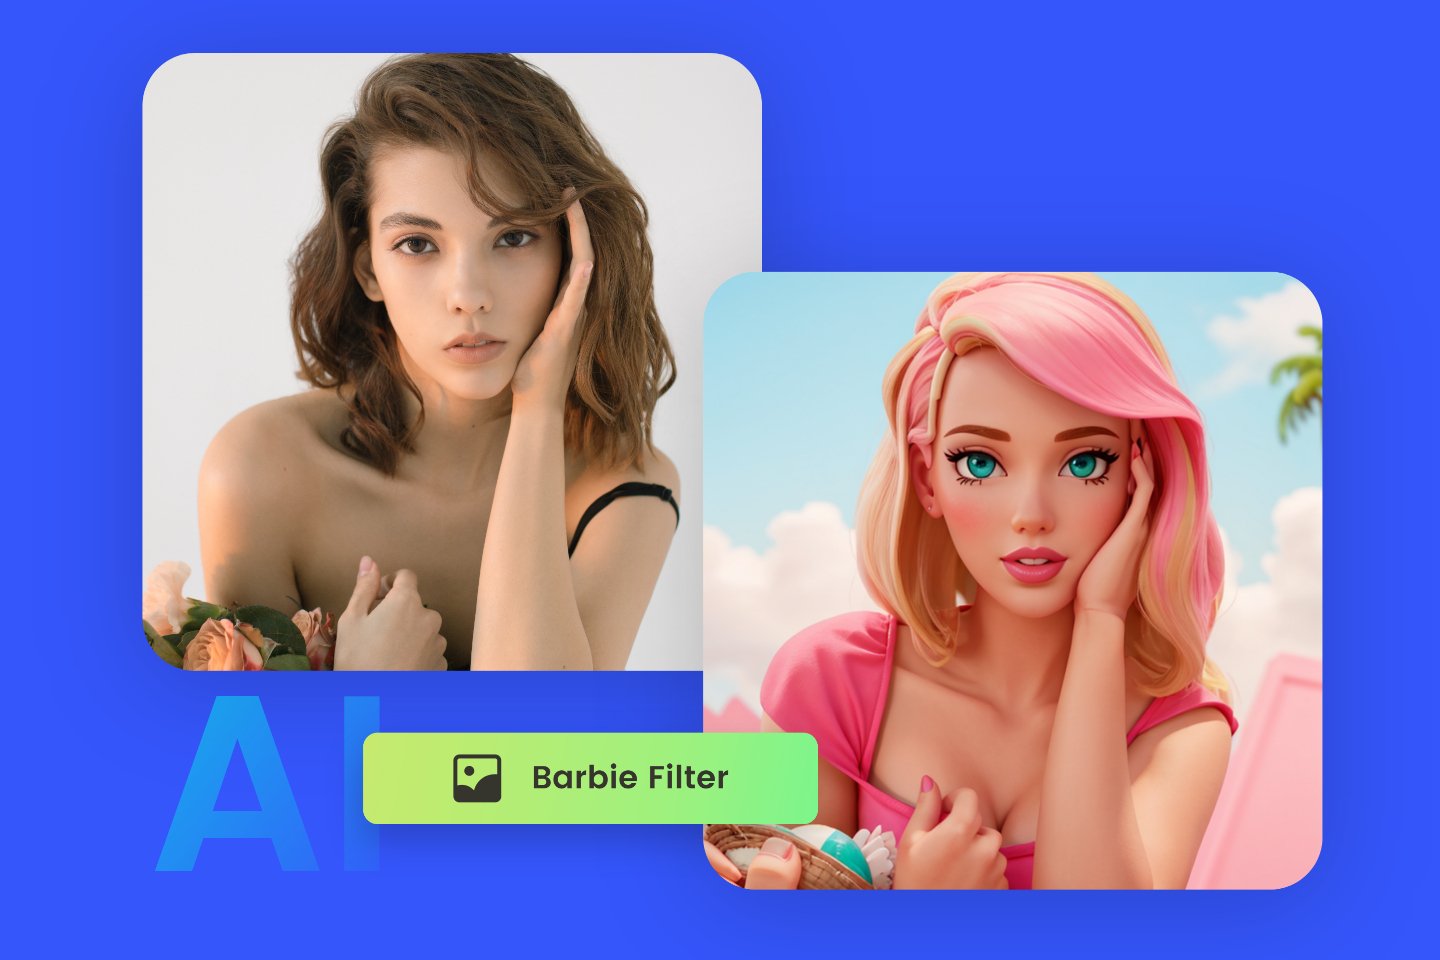 Apply the barbie filter to the female portrait online in fotor